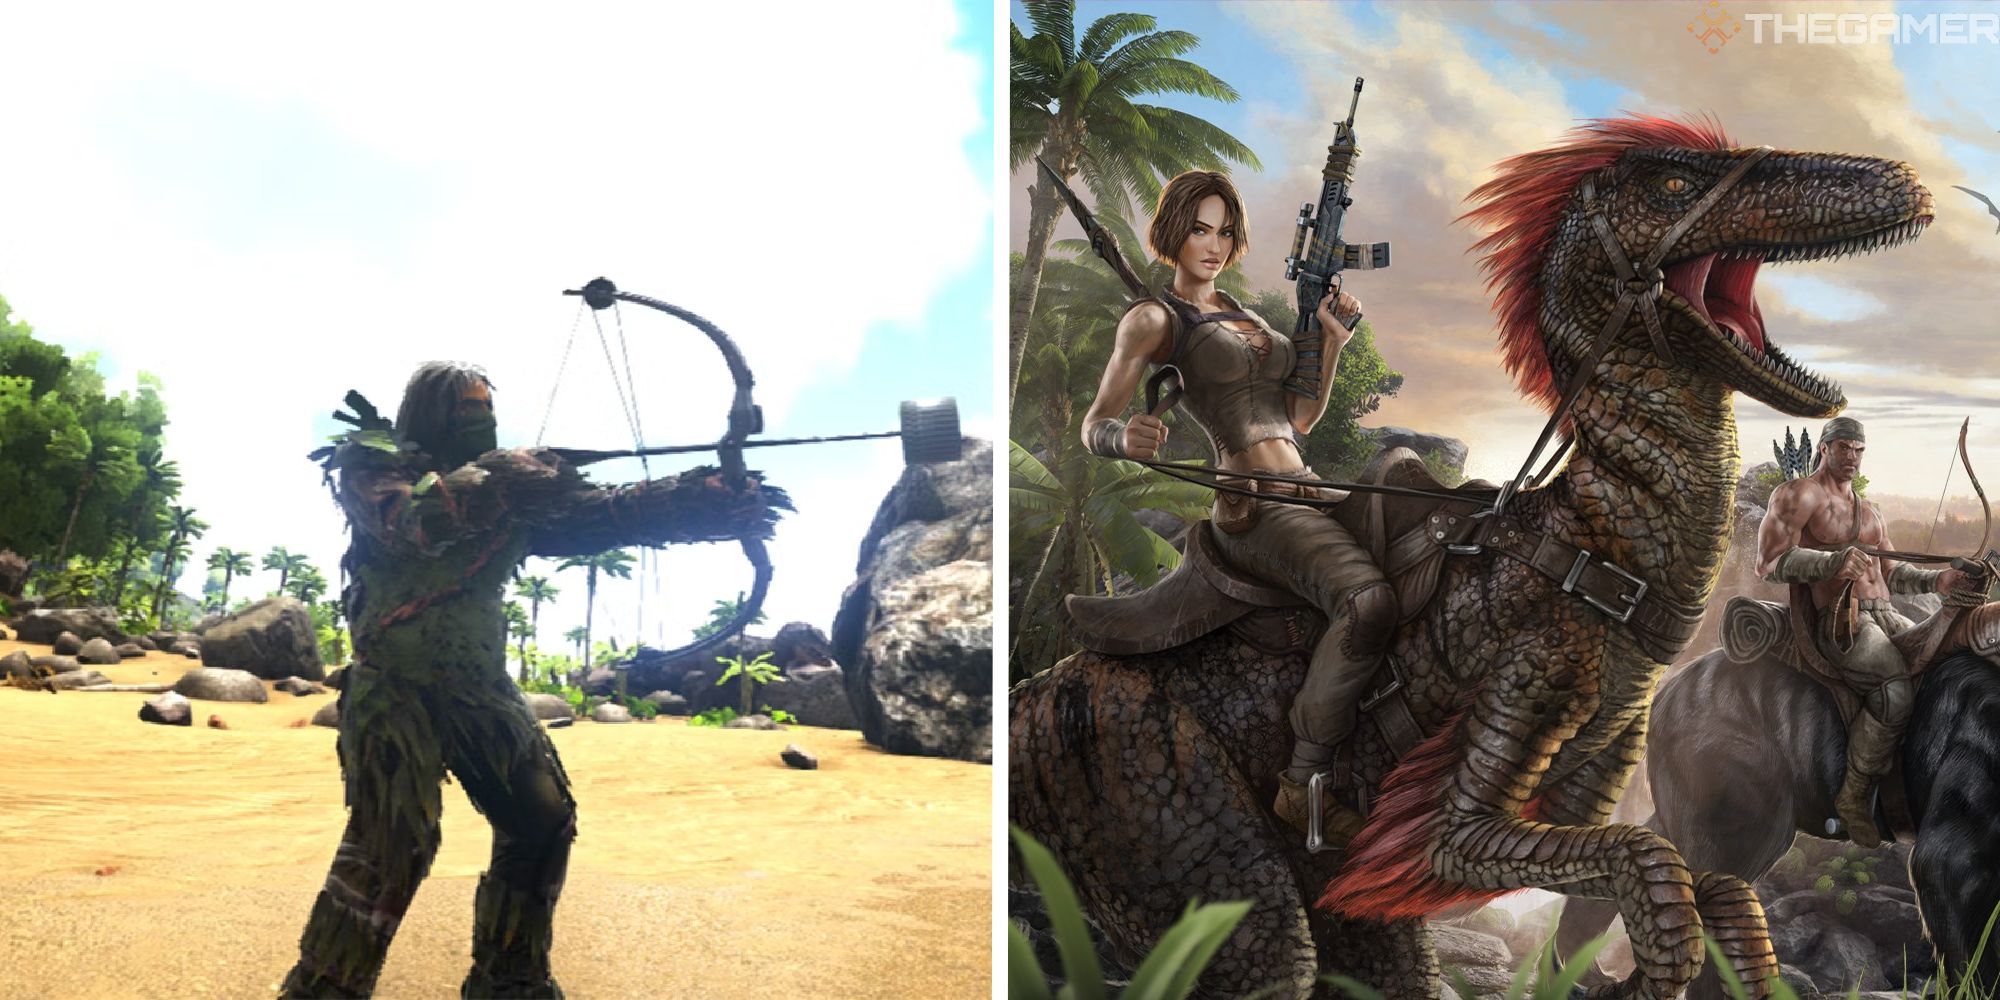 image of player holding a bow and arrow next to promotional art for ark survival evolved